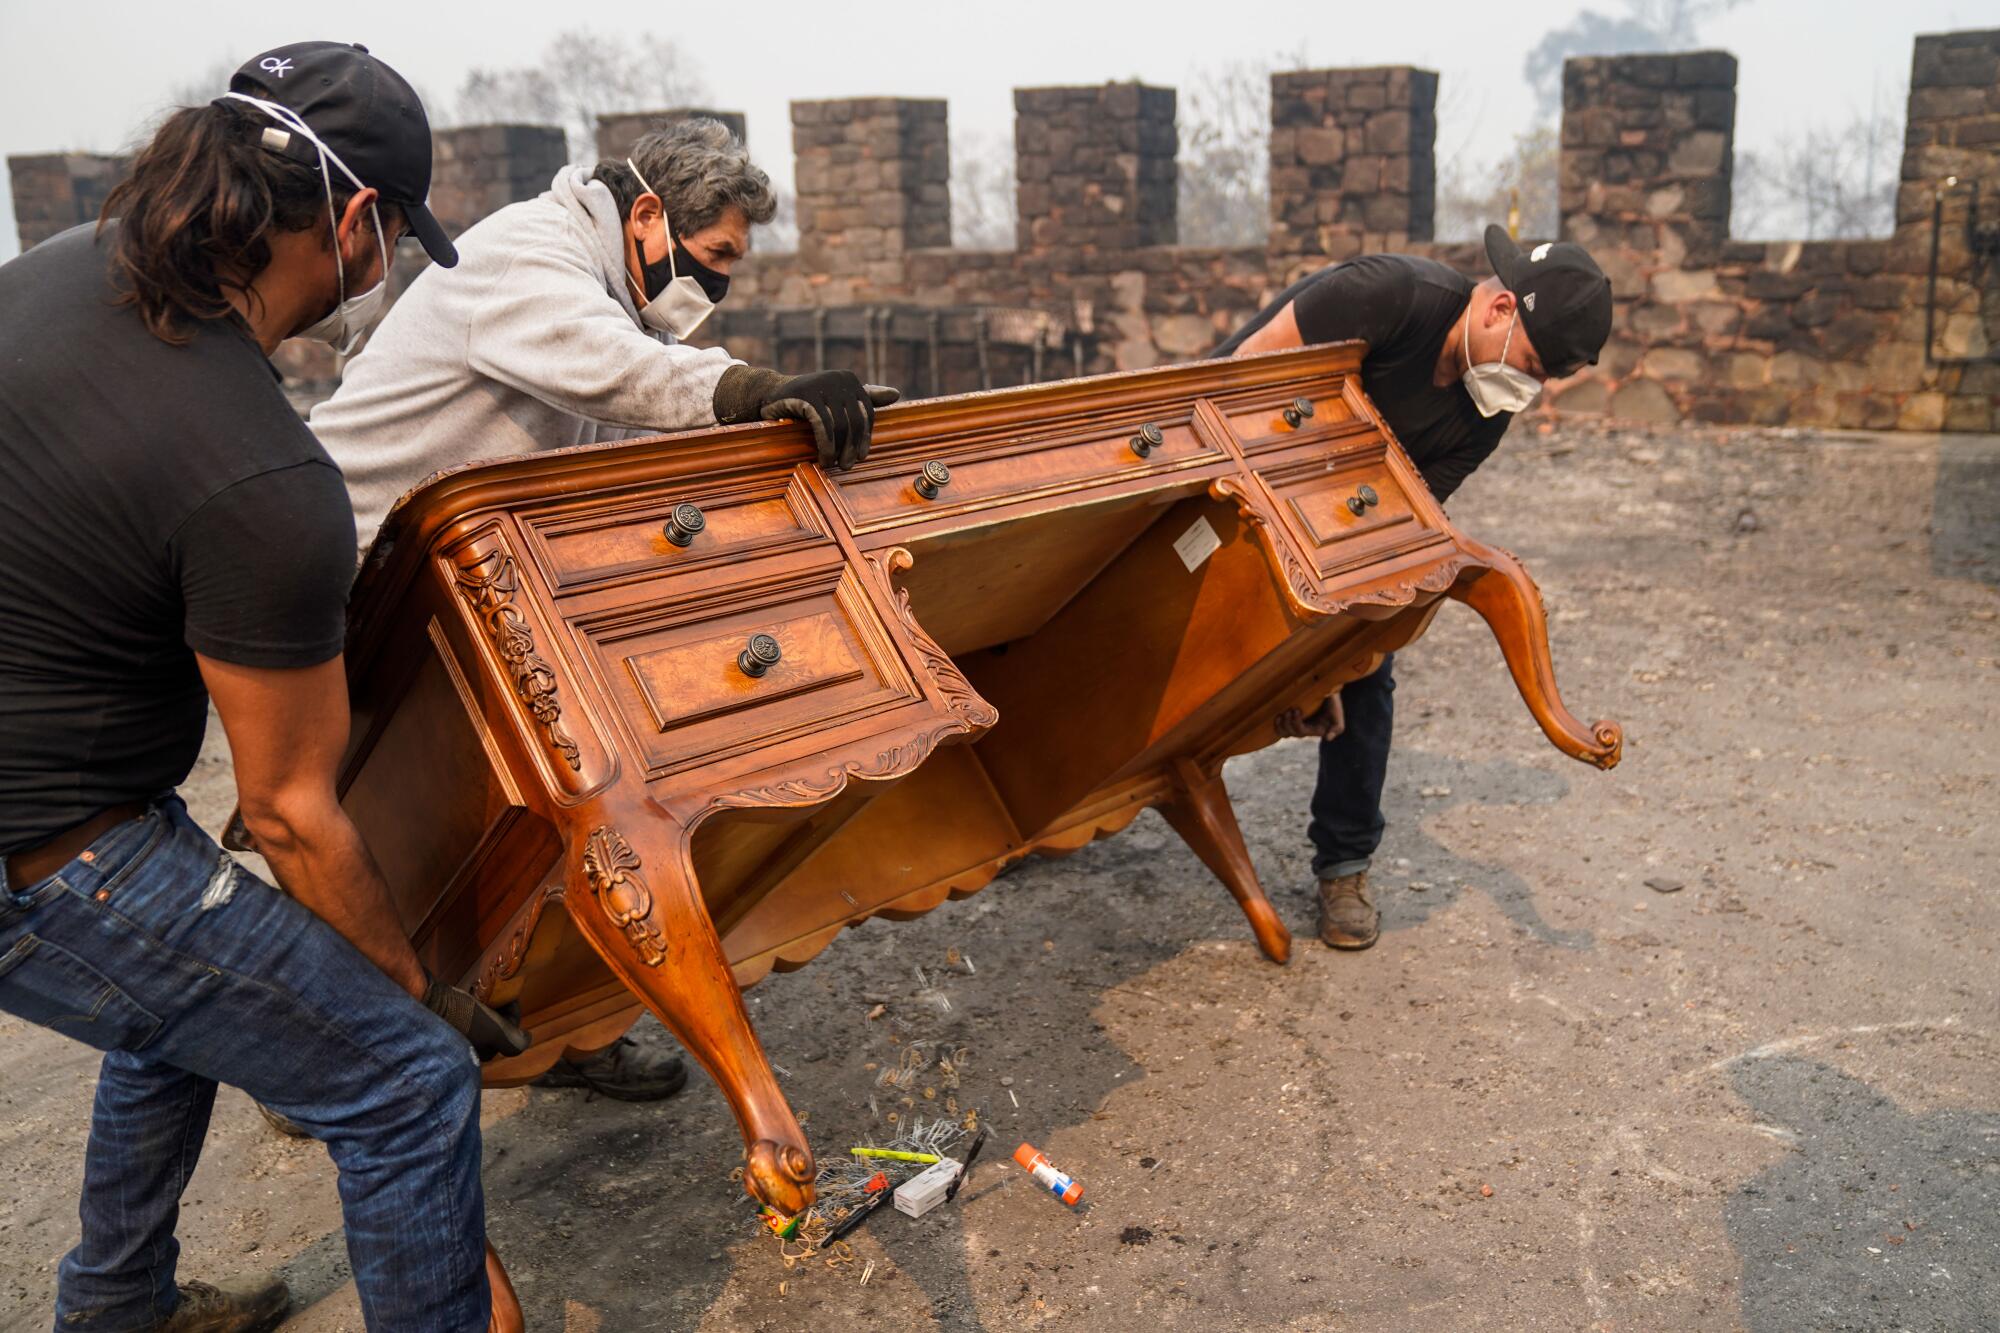 Workers in masks carry a desk recovered from a burned building at a Napa County vineyard.